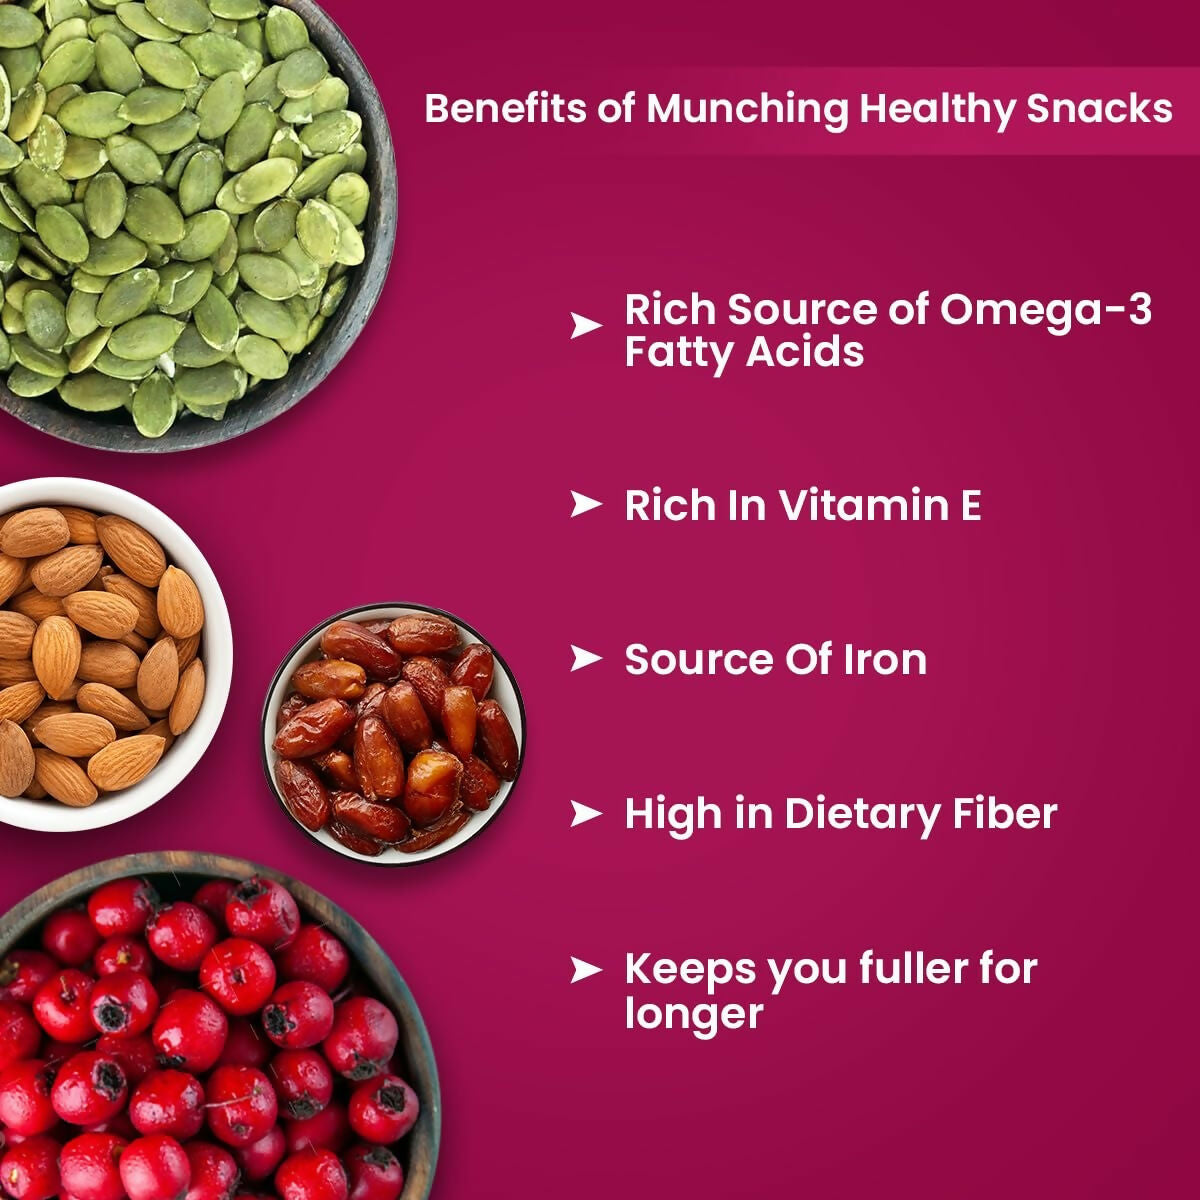 Sorich Organics Mother's Superfood Mix Nuts & Seeds